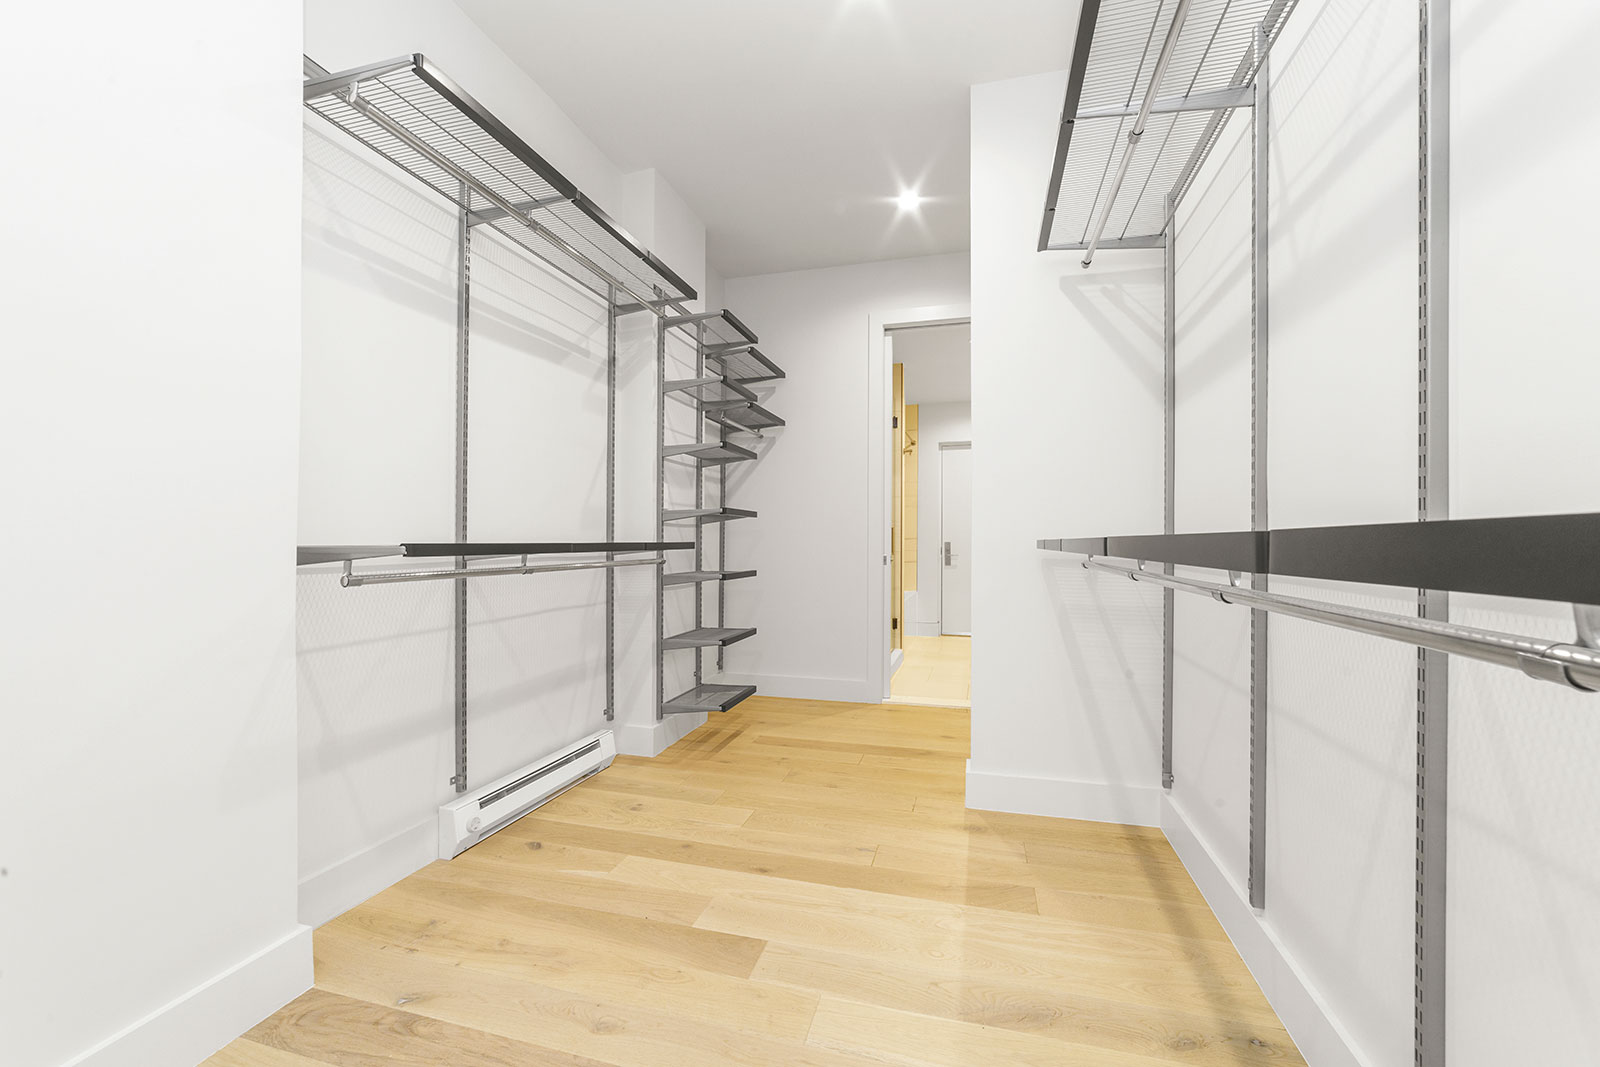 Apartments for Rent in Upper West Side Manhattan, NY - 125 Riverside - Closet with a Lot of Space, Light Wood-Style Flooring, White Walls, and Steel Hanging Rods and Shelves